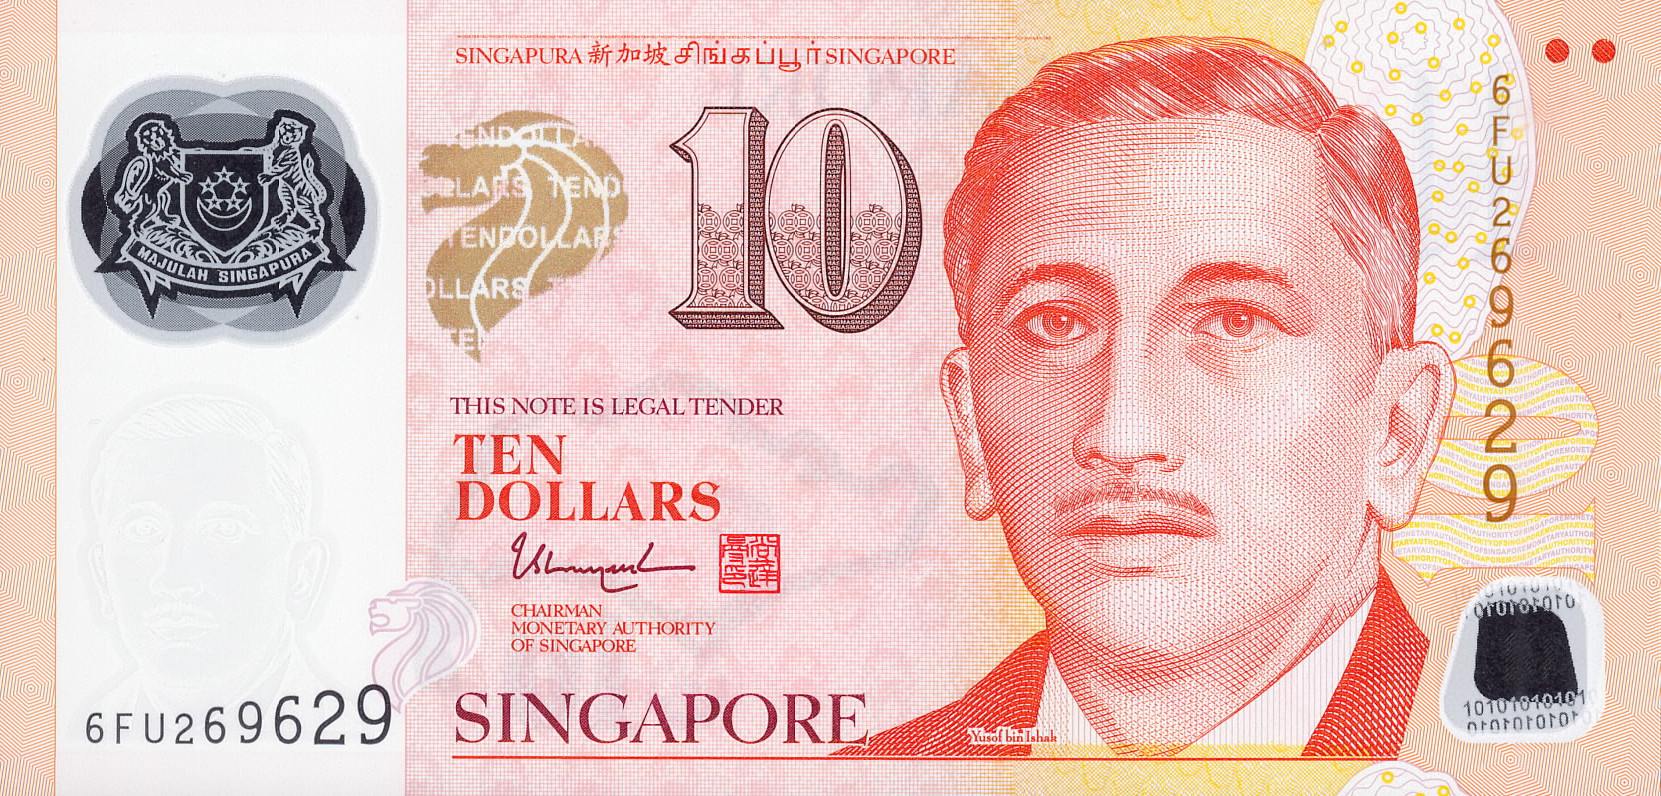 2020 SINGAPORE 10 DOLLARS POLYMER P-NEW UNC/> /> /> />W//2 INVERTED TRIANGLE THARMAN